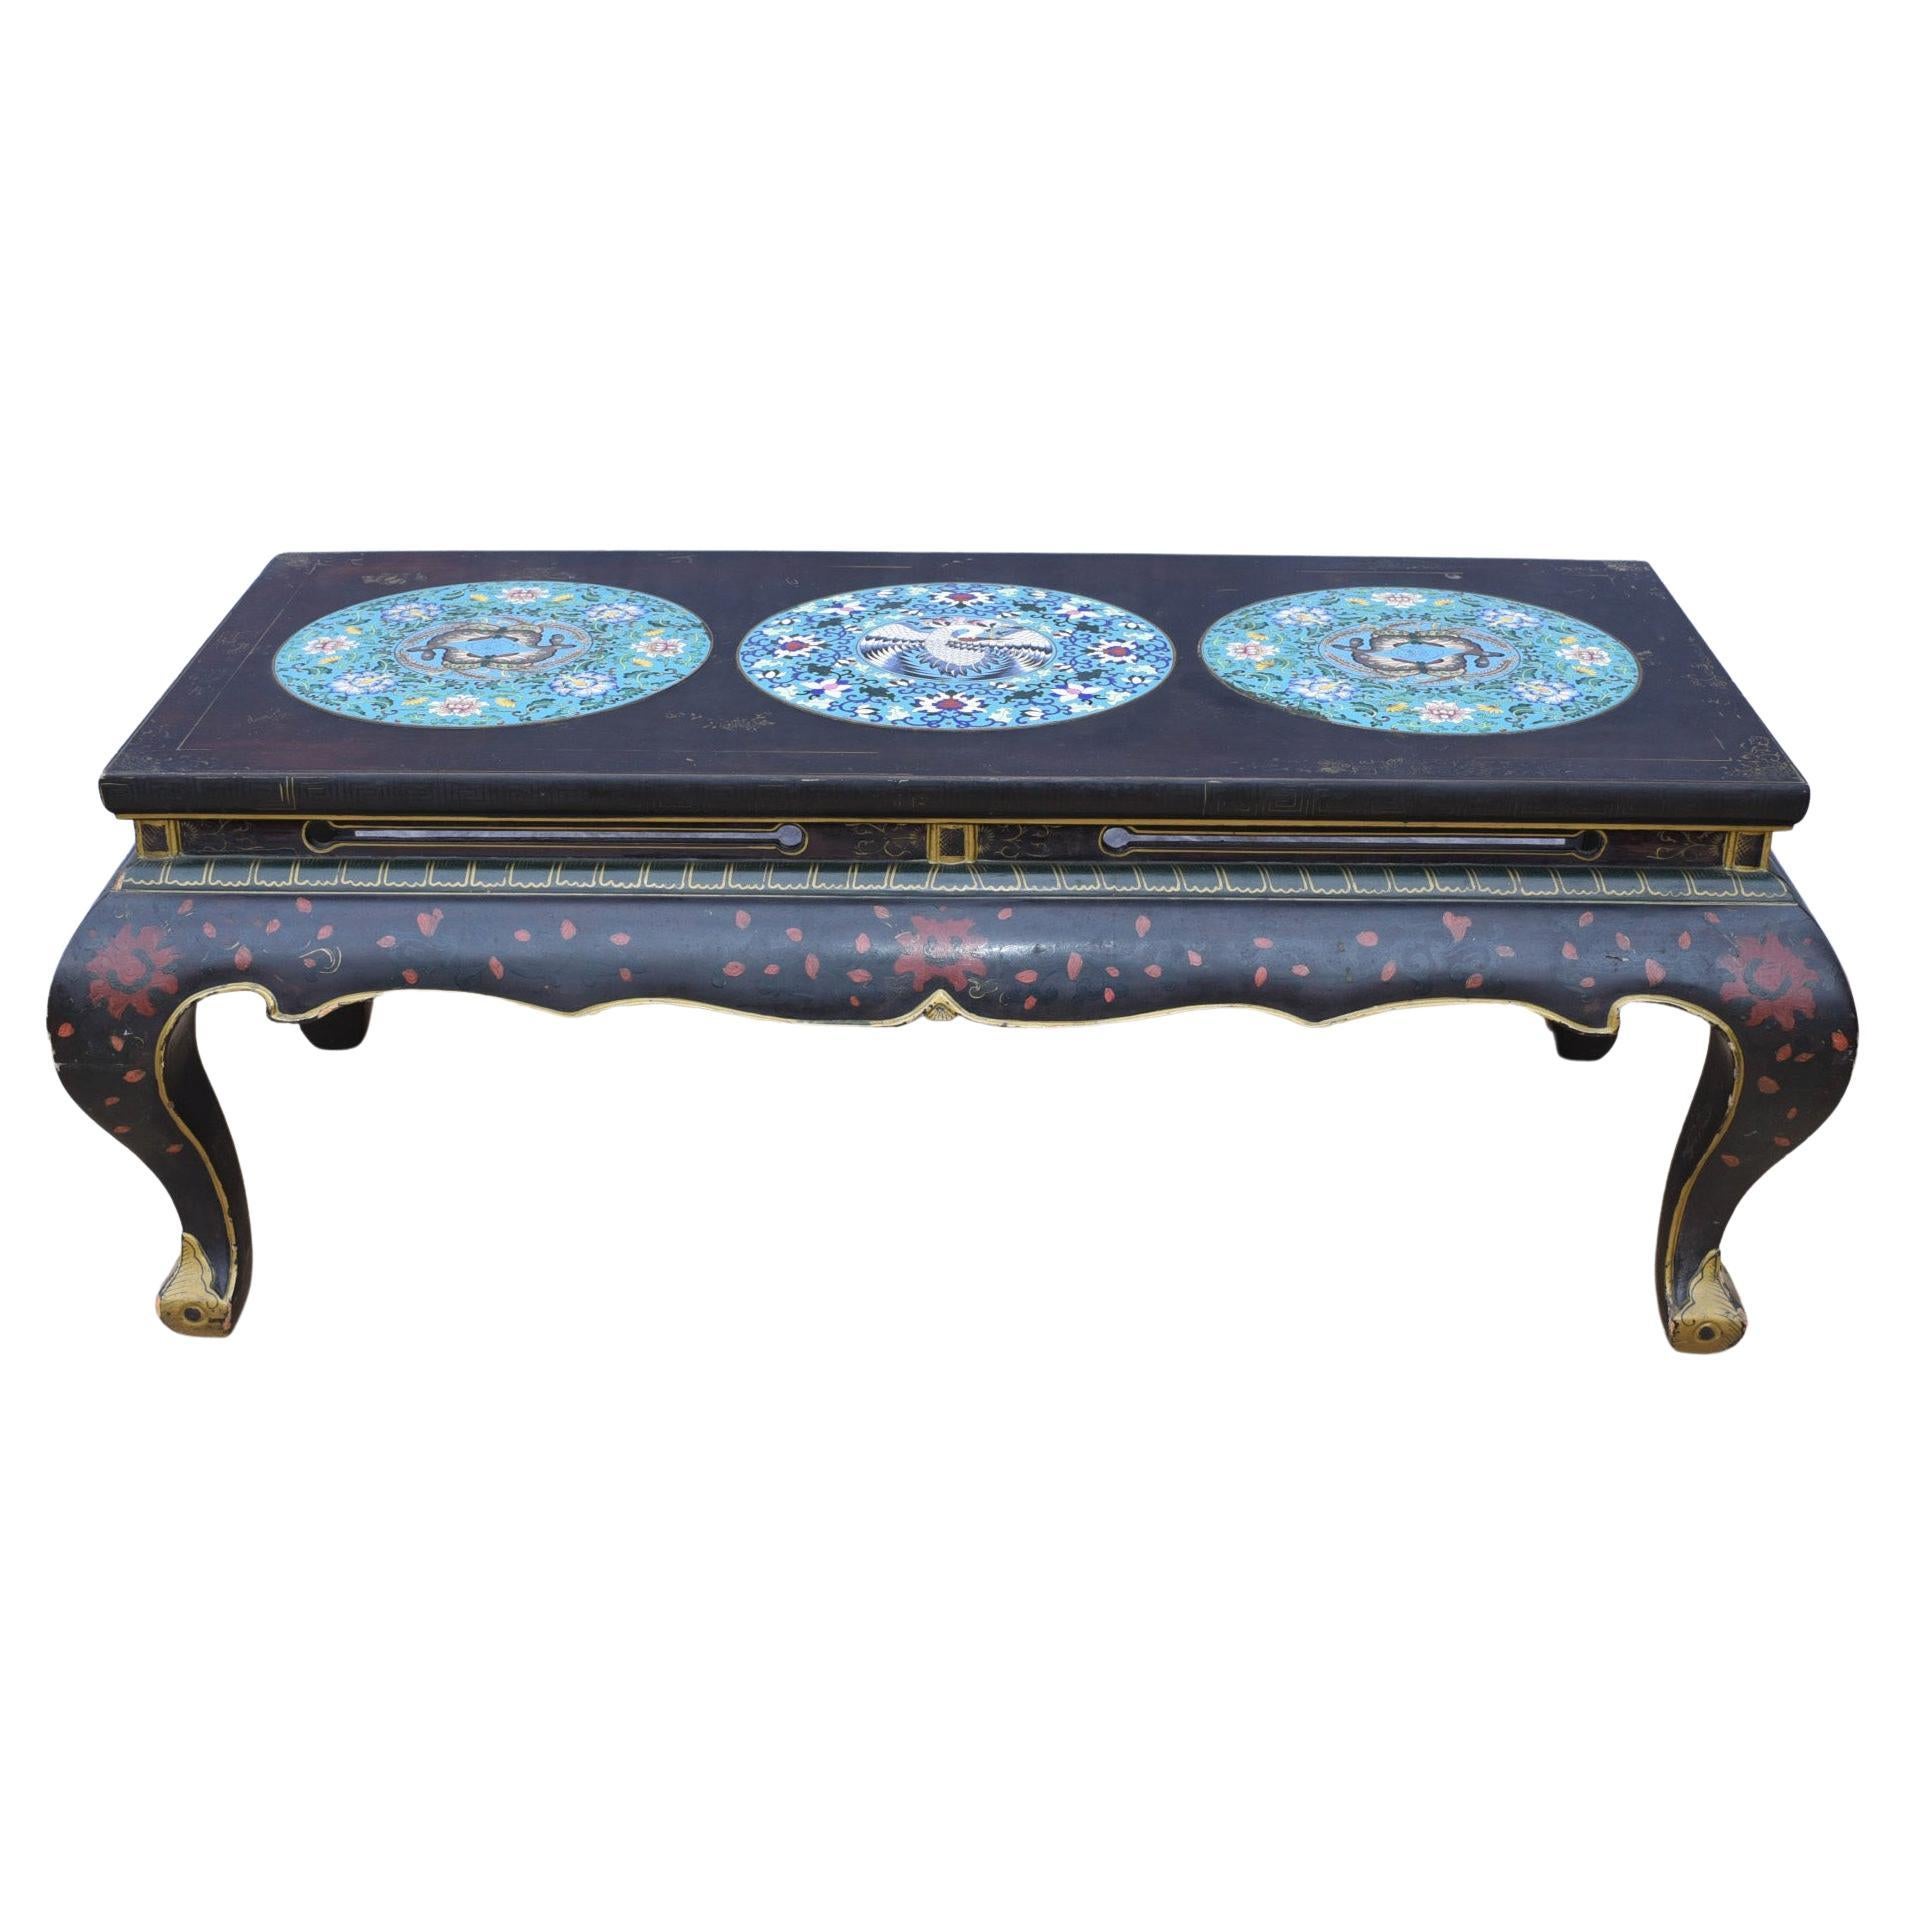 Chinese Lacquer Coffee Table, Cloisonne Porcelain Plaques For Sale